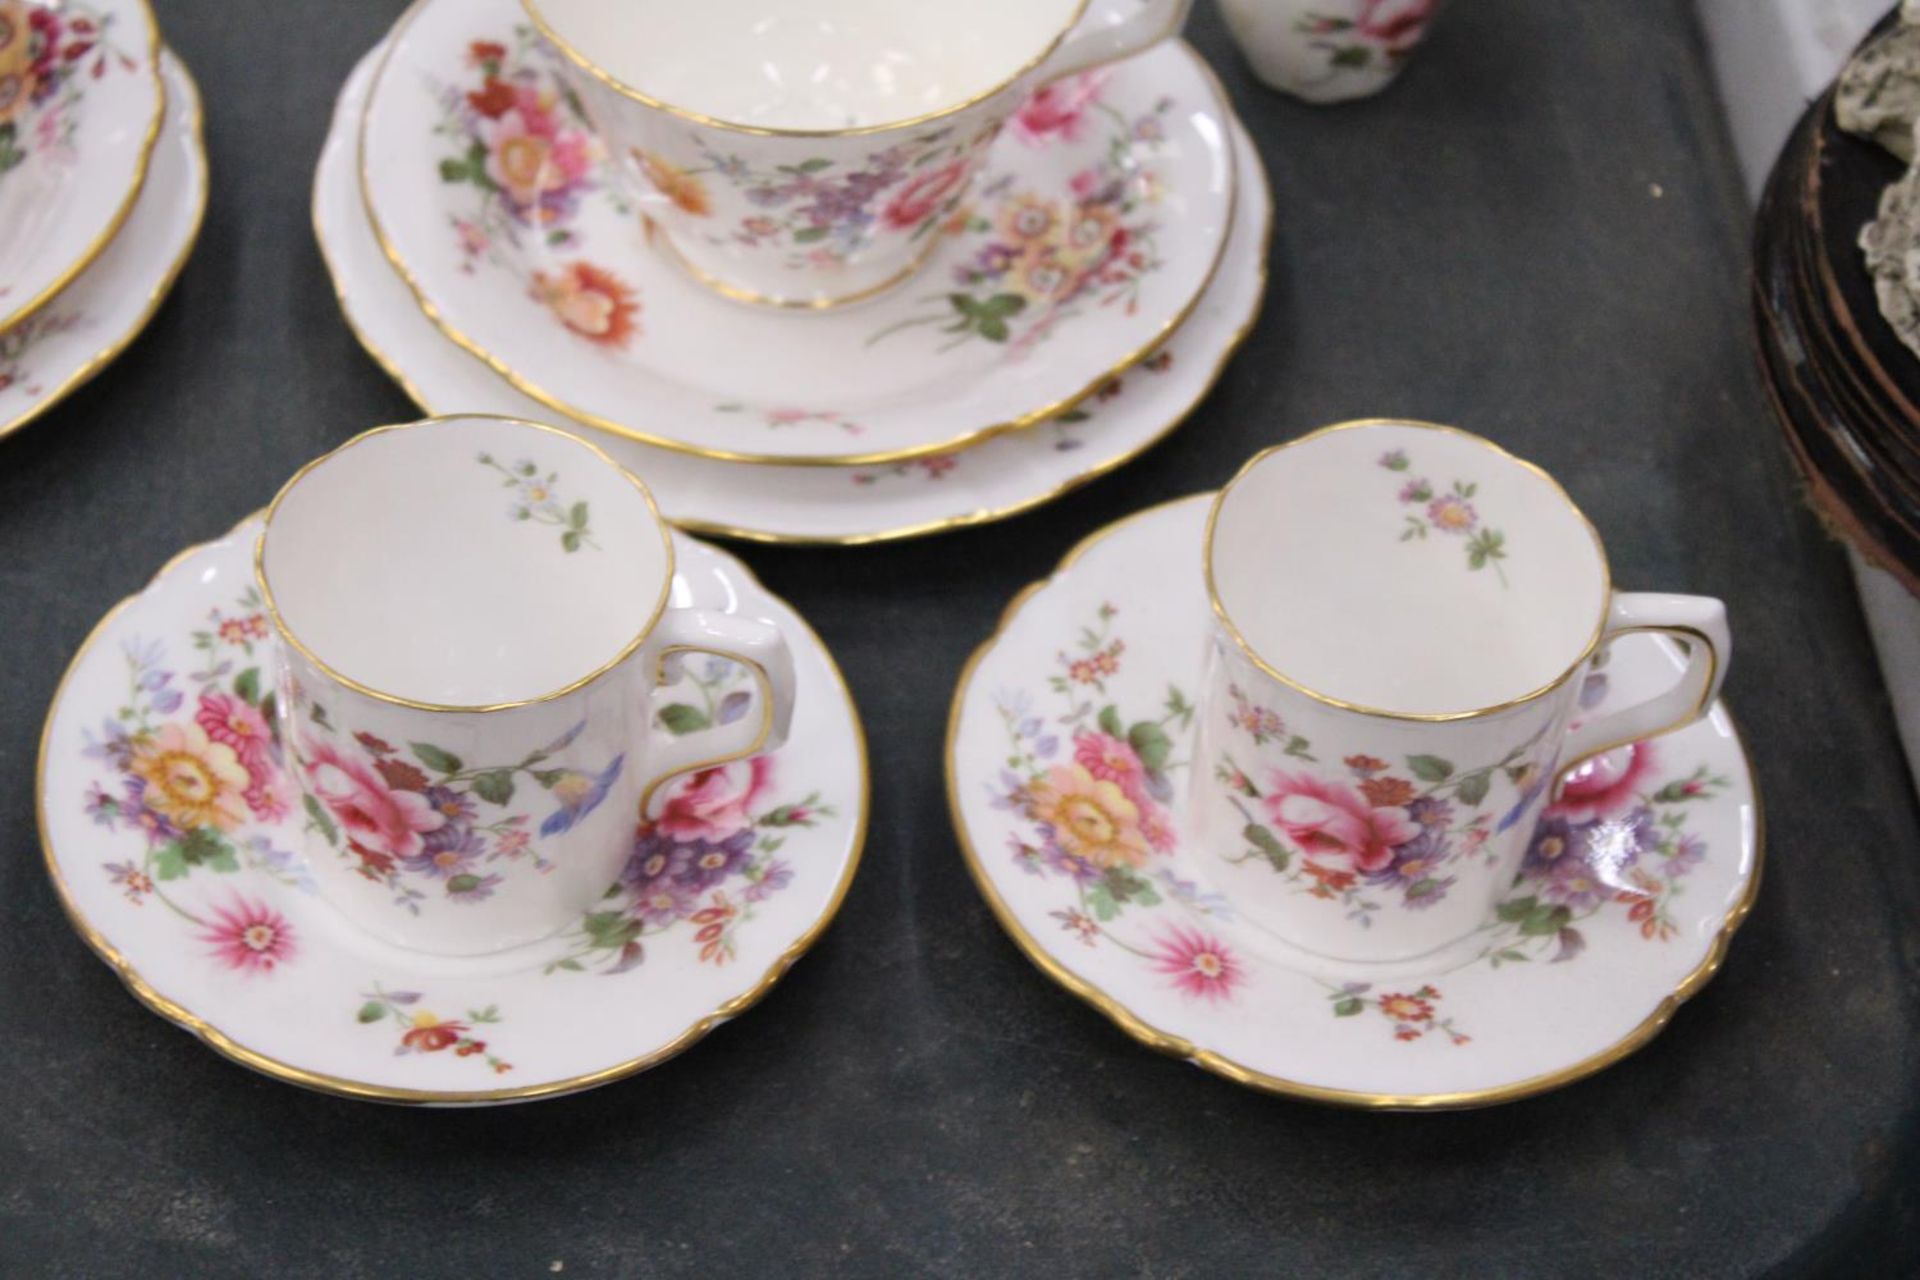 A COLLECTION OF ROYAL CROWN DERBY 'DERBY POSIES' CHINA TO INCLUDE CUPS AND SAUCERS, JUG, BEAKERS, - Image 5 of 6